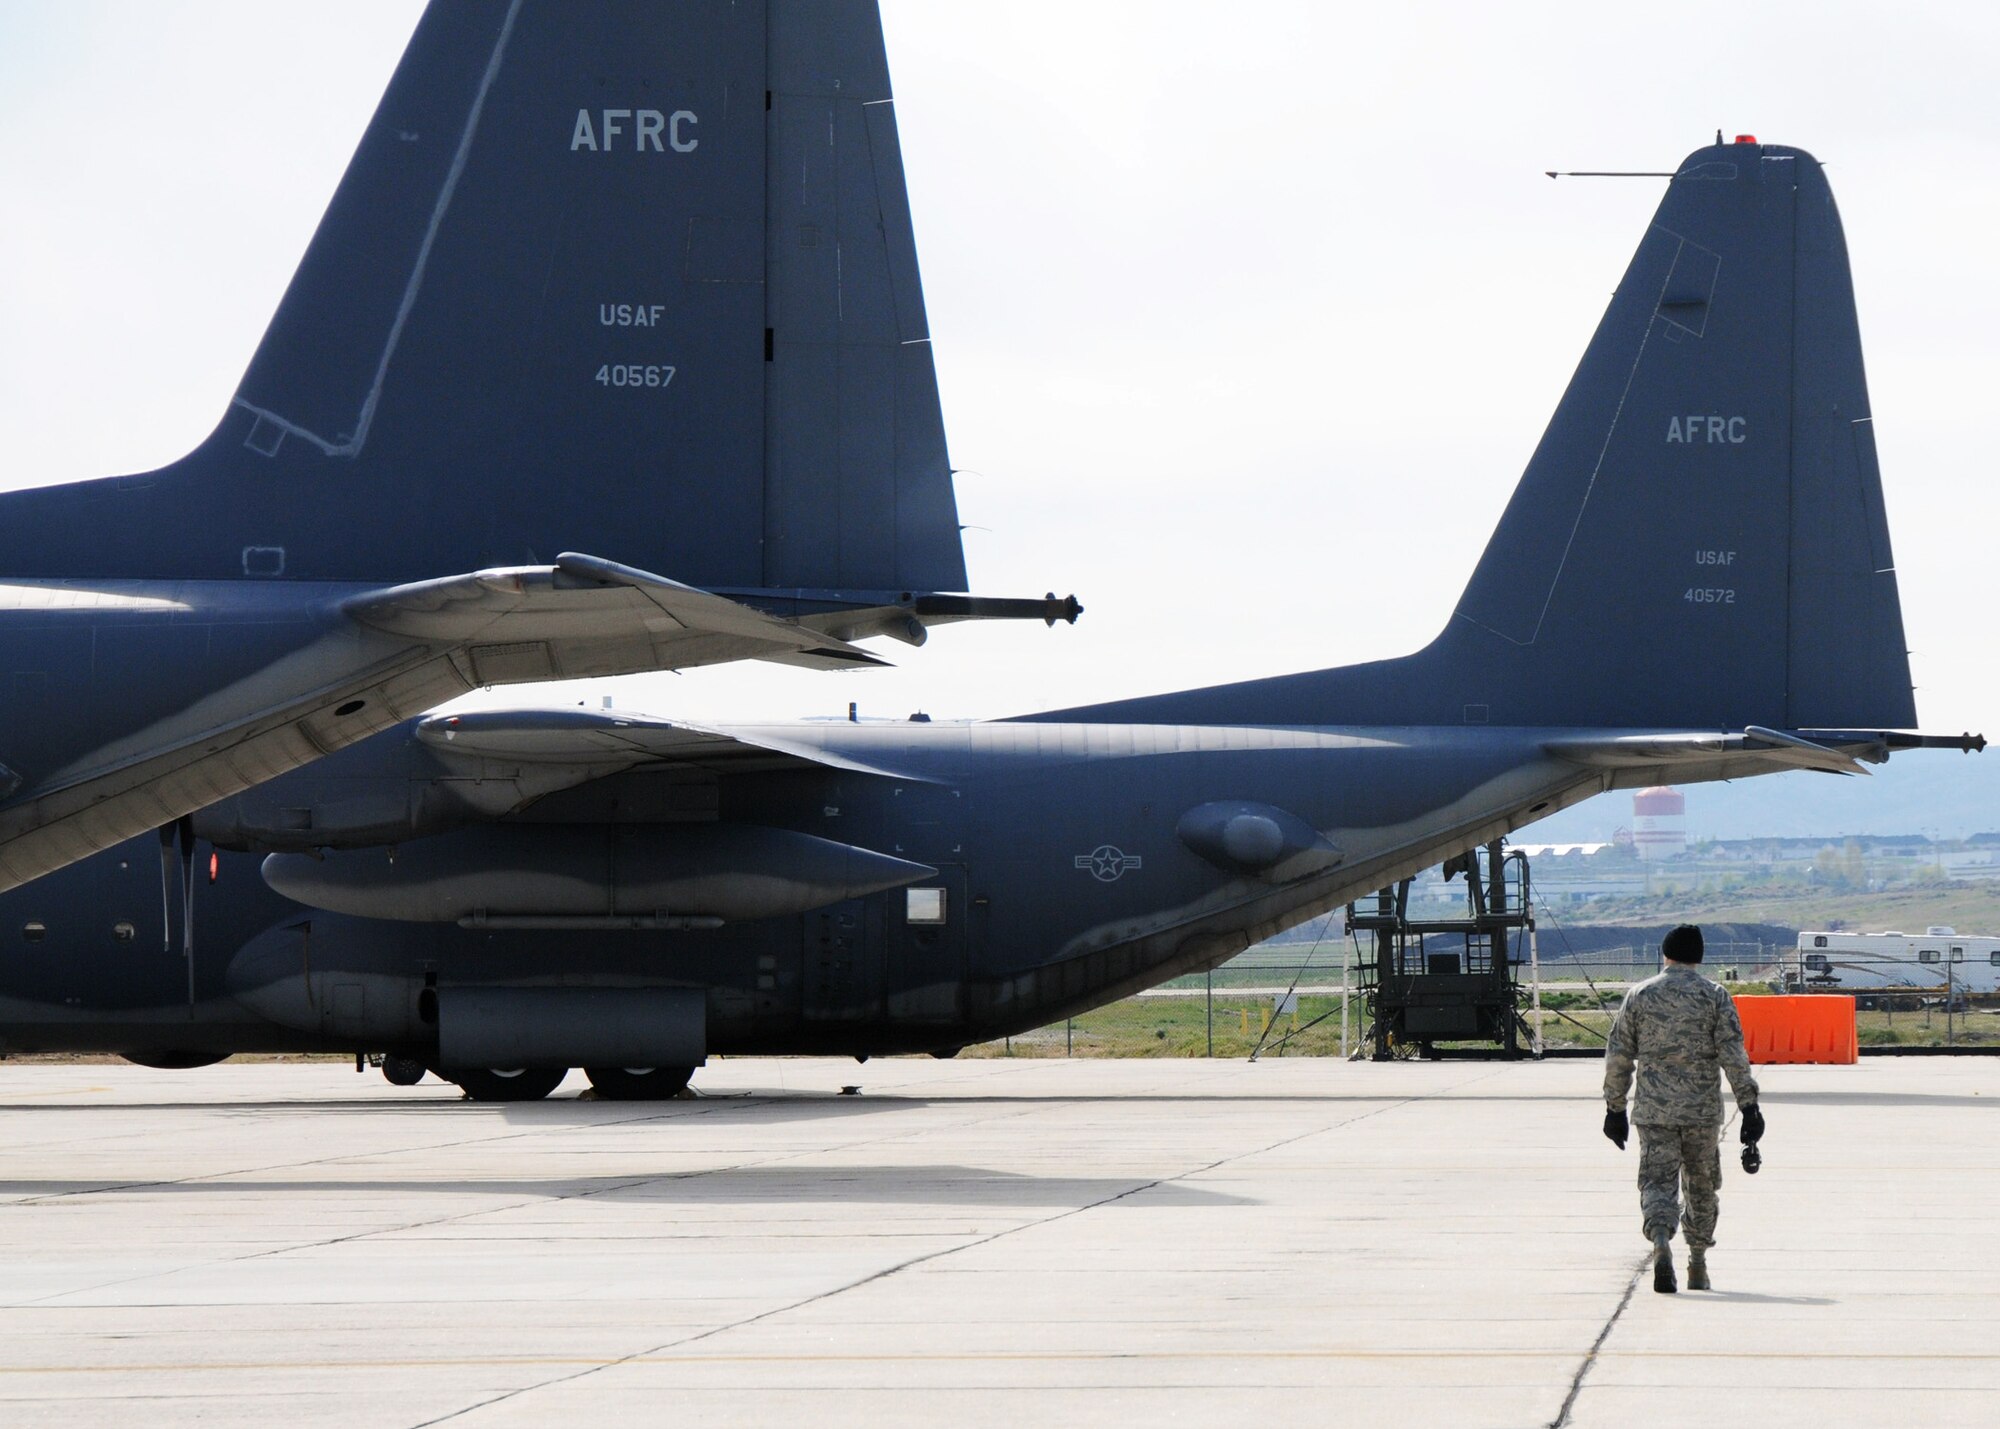 Master Sgt. Larry Pelton, 919th Maintenance Group, walks toward the last two remaining MC-130E Combat Talons destined for retirement.    919th maintainers were sent to Gowen Field, Idaho, to prepare four Talons to take off for one more mission – a flight into retirement and decommissioning.  Three of the Talons flew to Davis-Monthan Air Force Base, Ariz.  The other went to Hurlburt Field, Fla., to be placed in the Air Force Special Operations Command airpark.  (U.S. Air Force photo/Tech. Sgt. Samuel King Jr.)